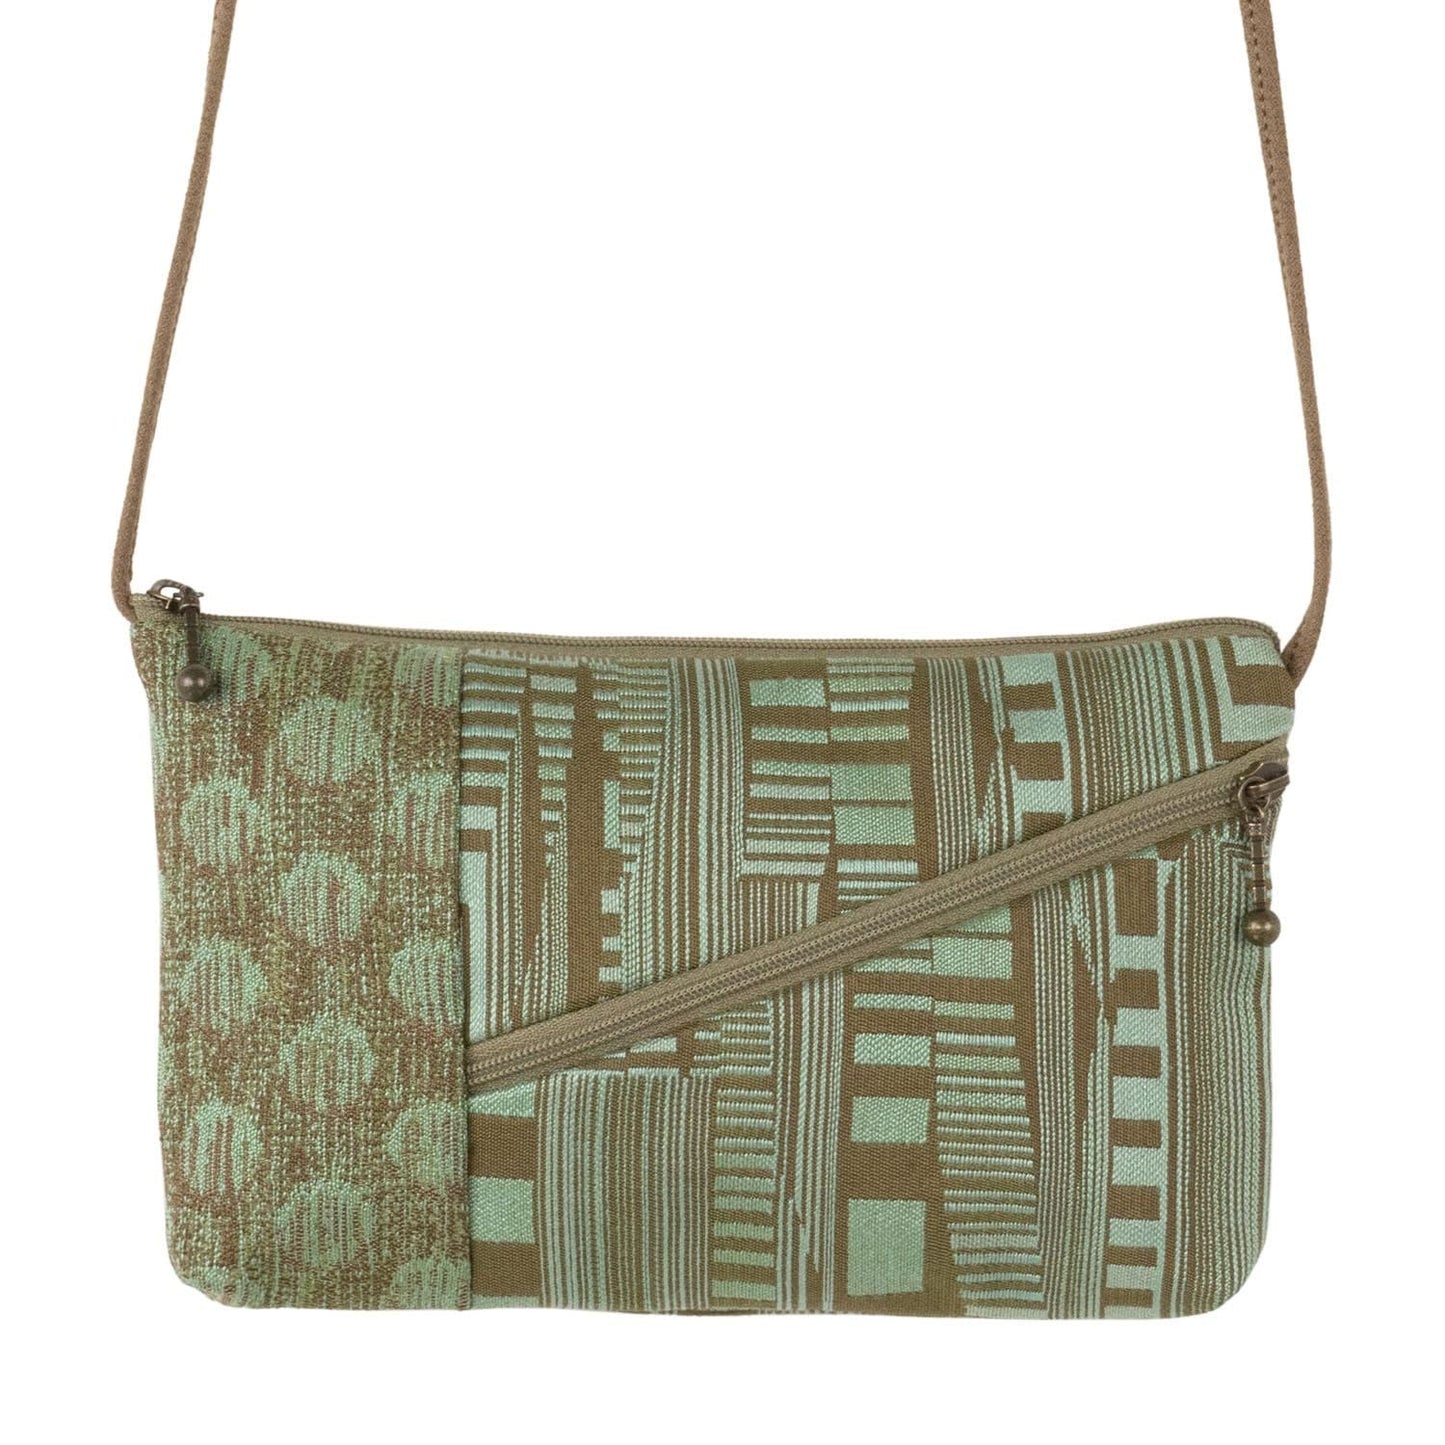 BAG Tomboy in Optic Olive